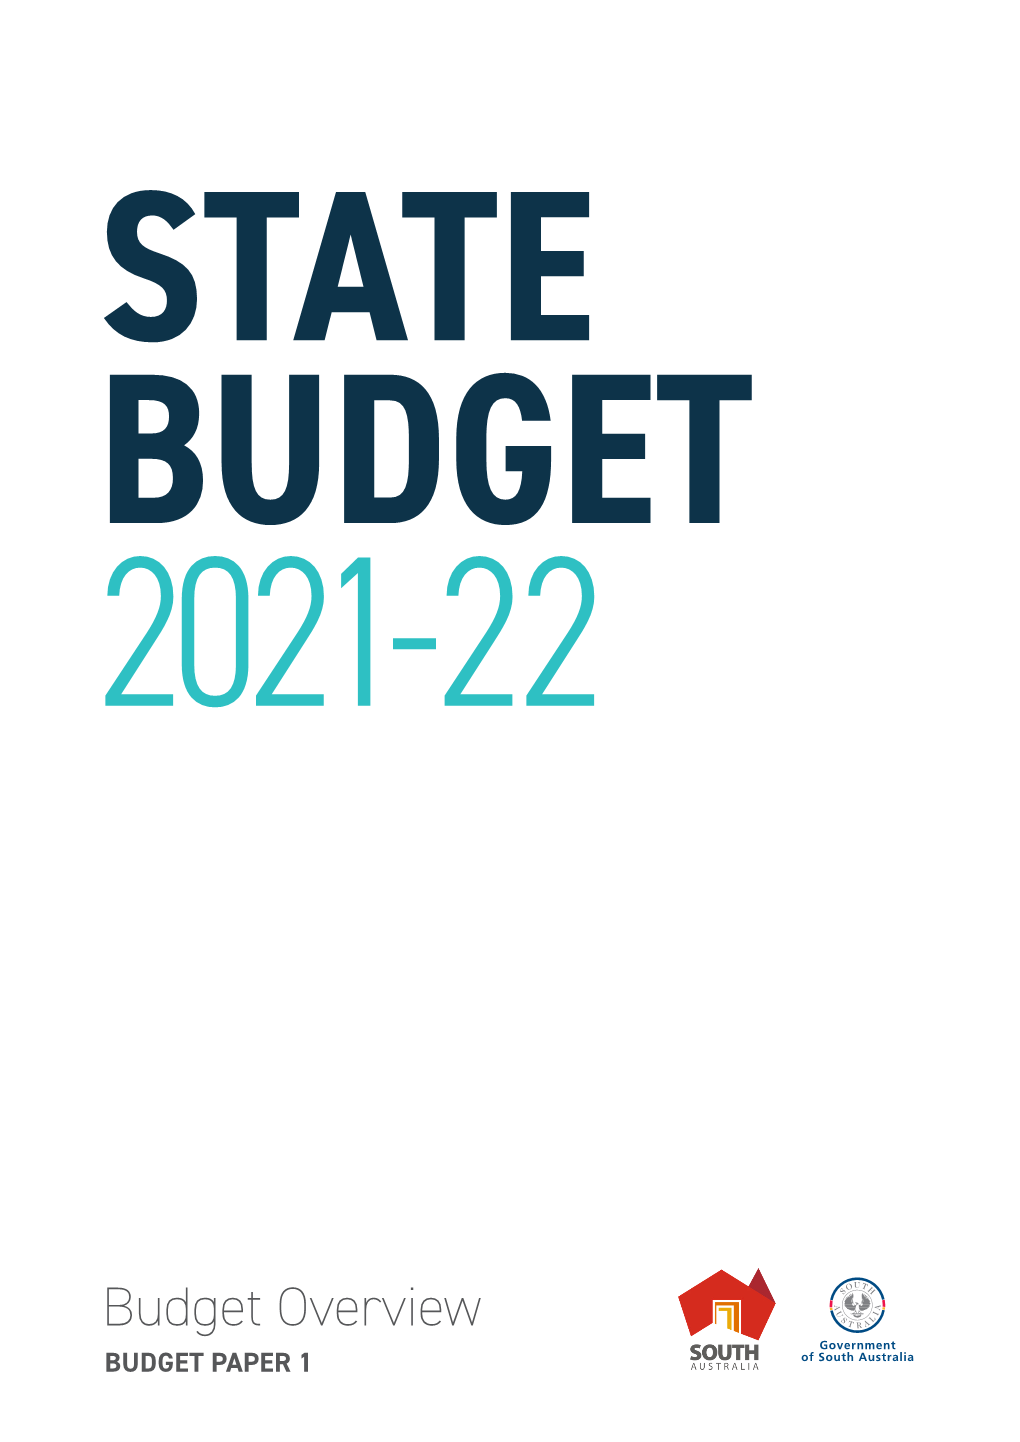 Budget Overview BUDGET PAPER 1 STATE BUDGET 2021- 22